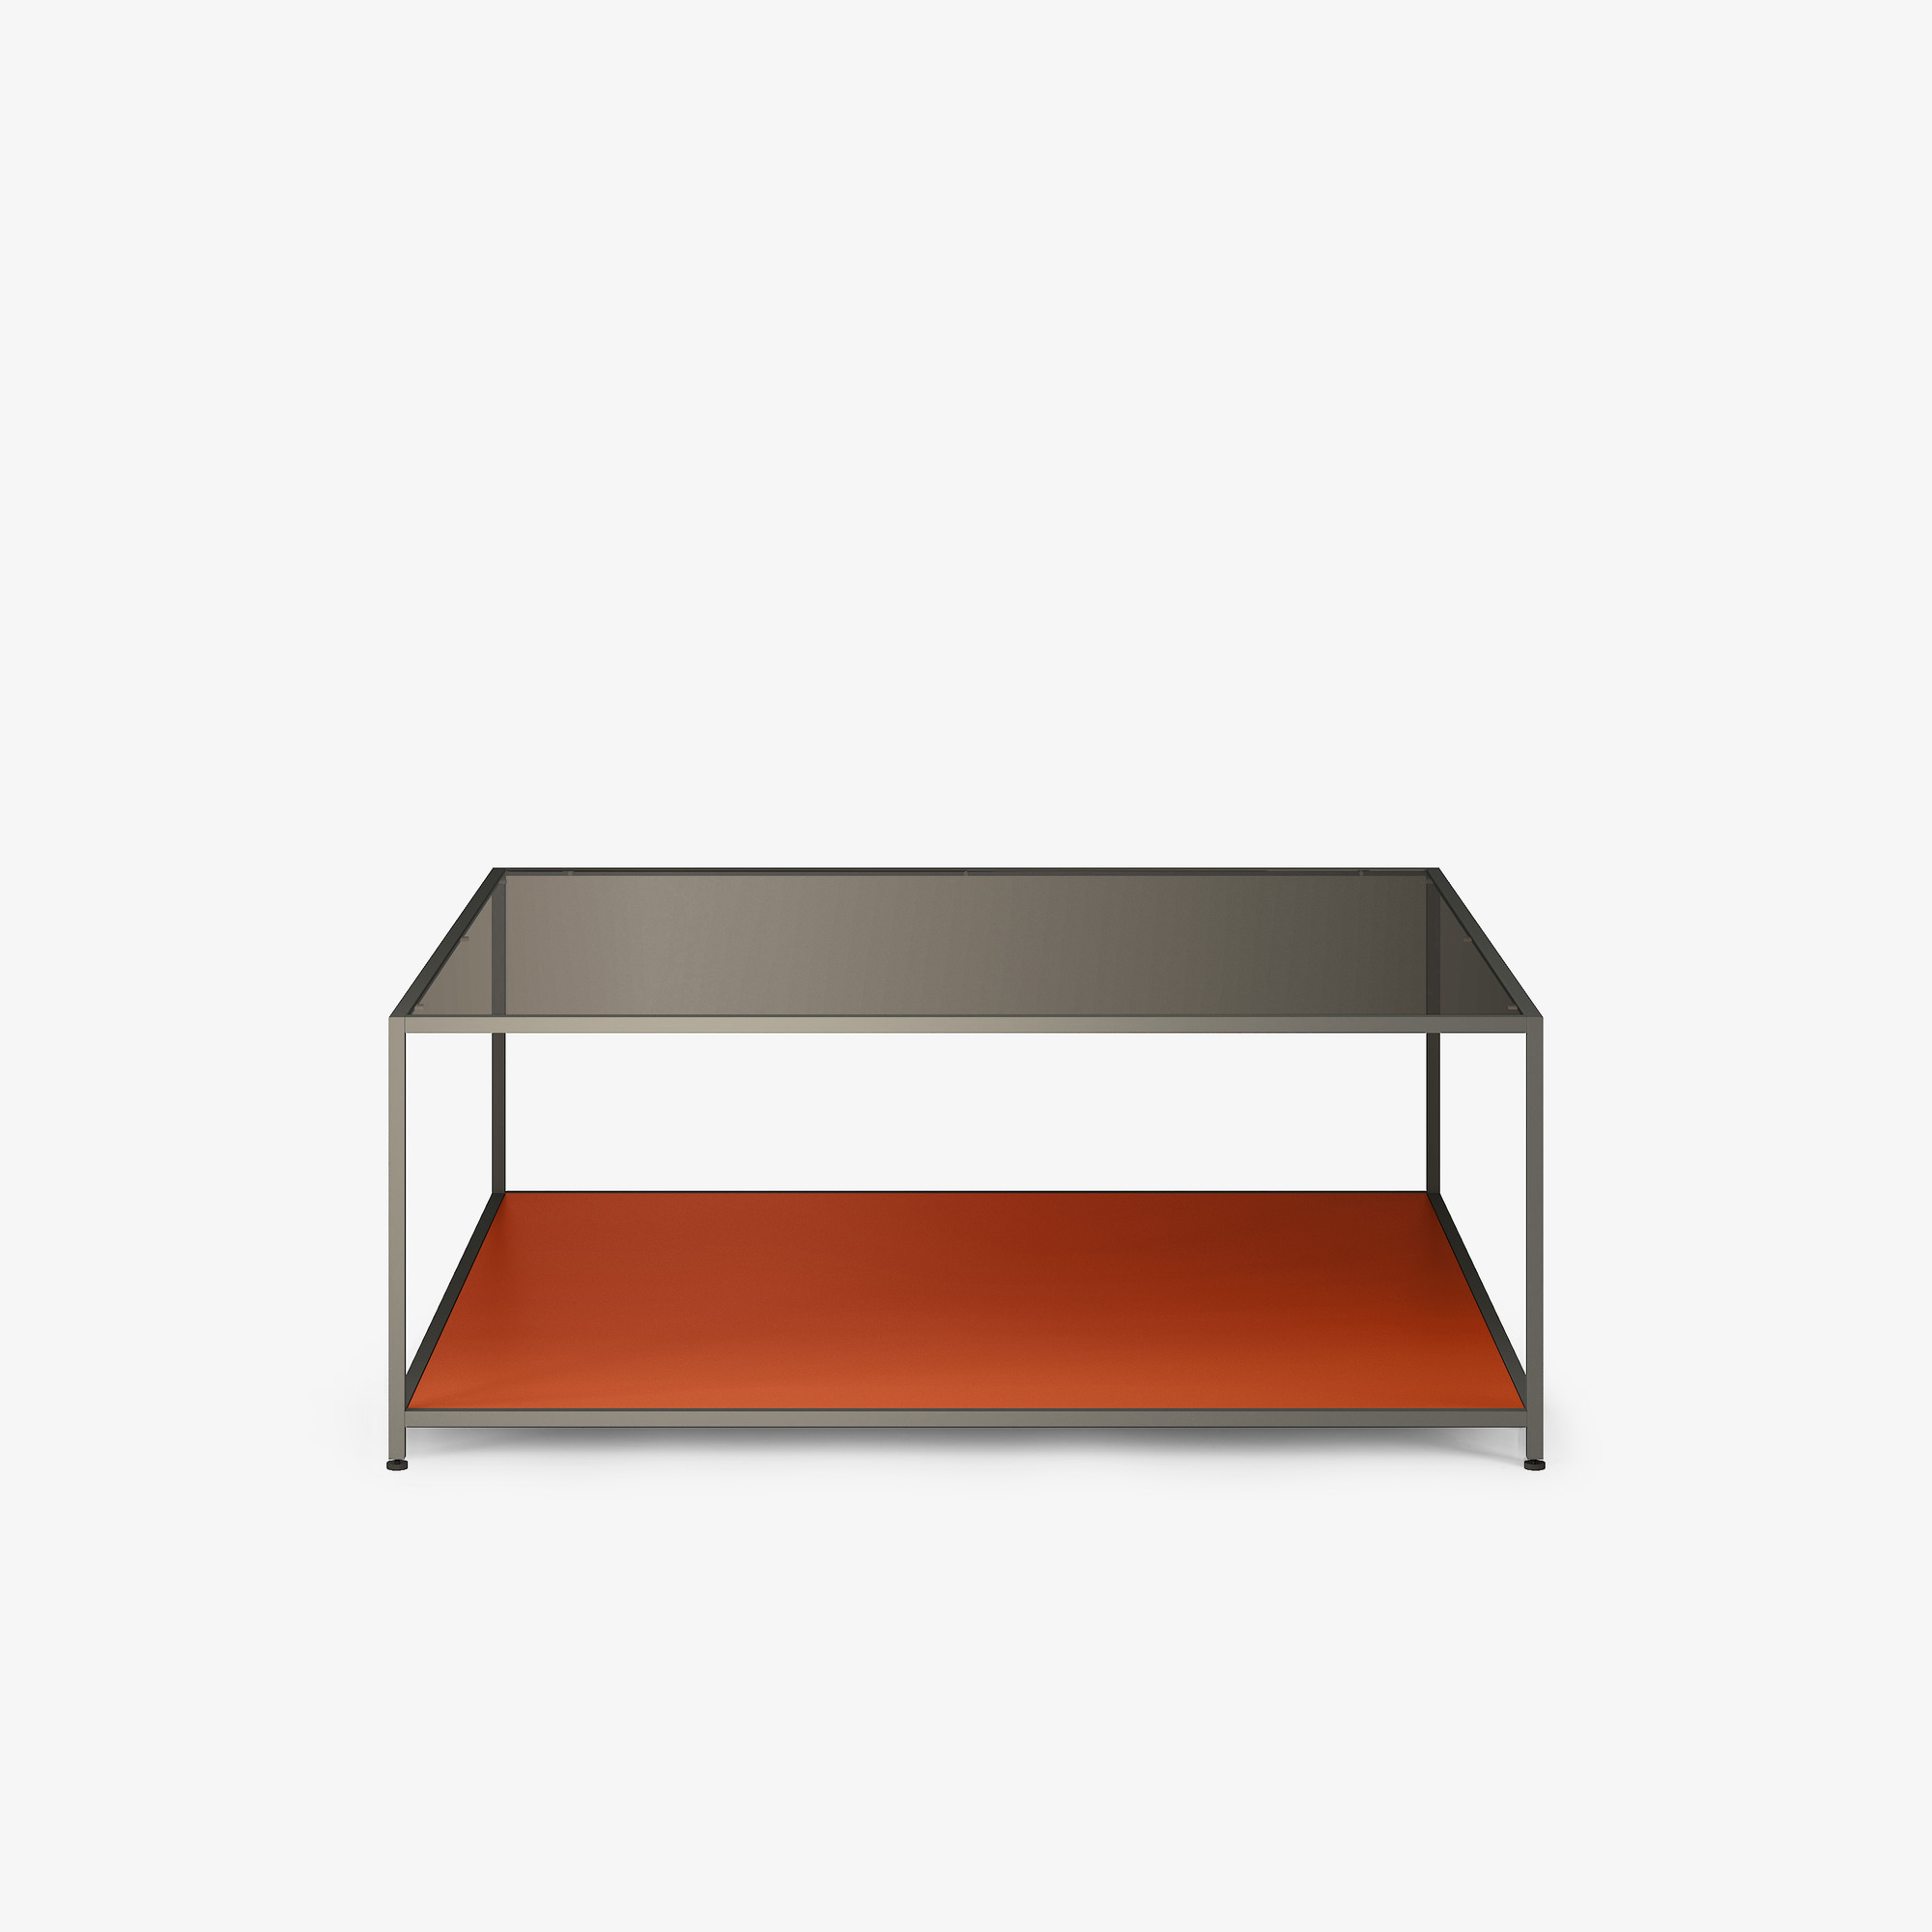 Image Square low table 5